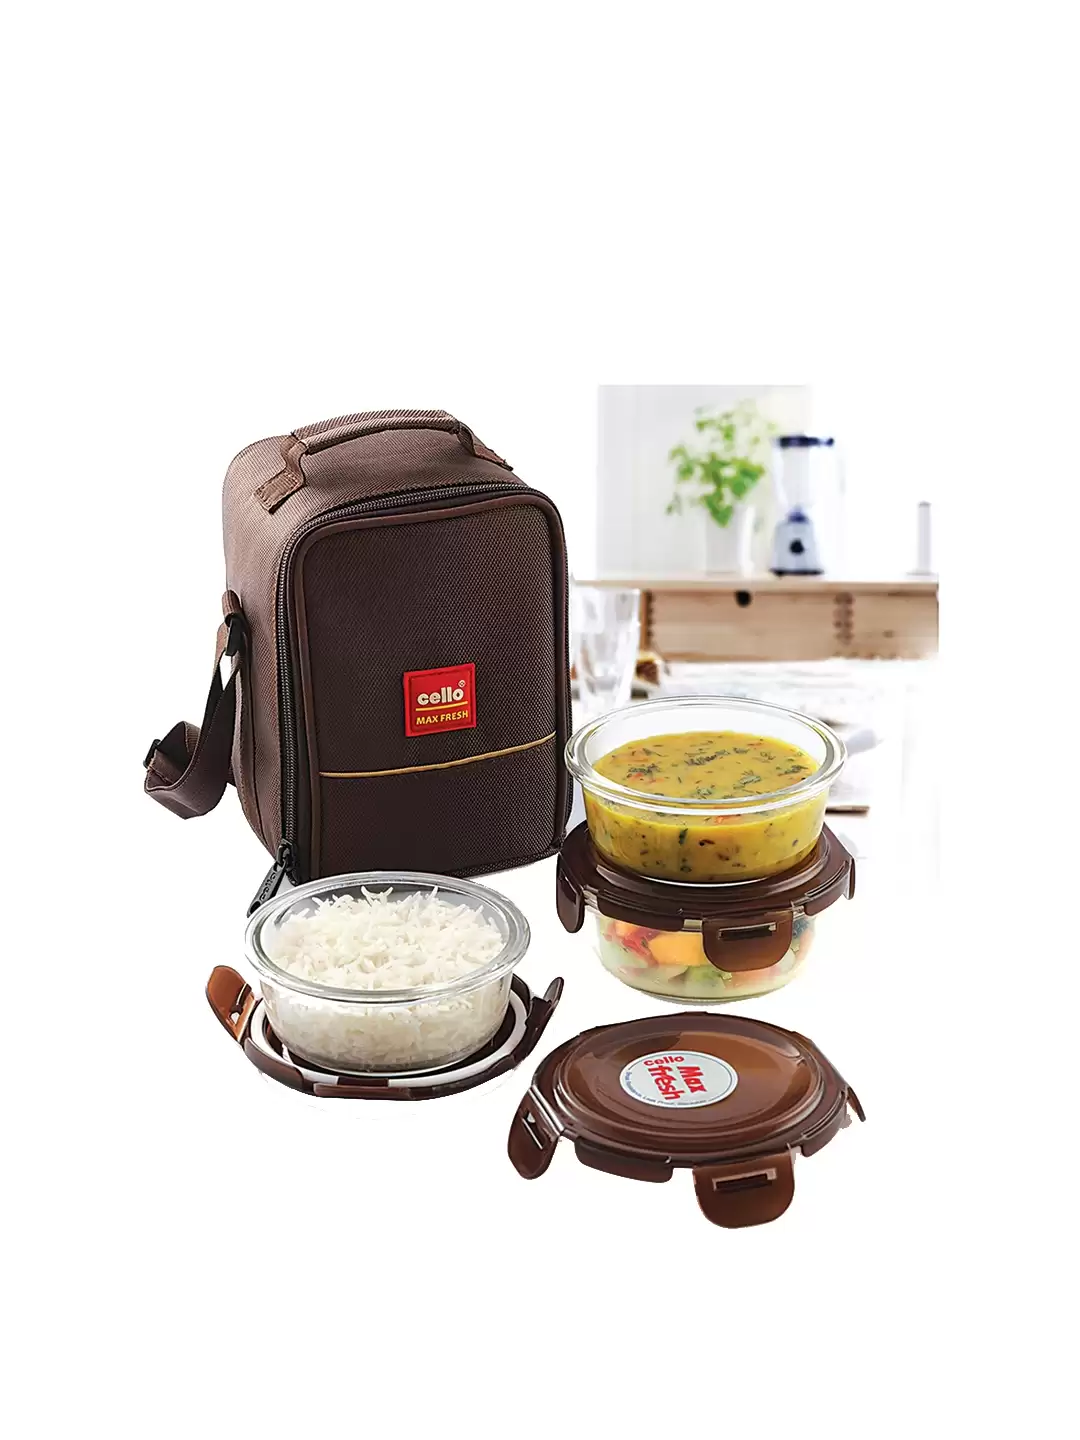 Grab 15% Off On Cello Lunch Box With This Discount Coupon At Myntra